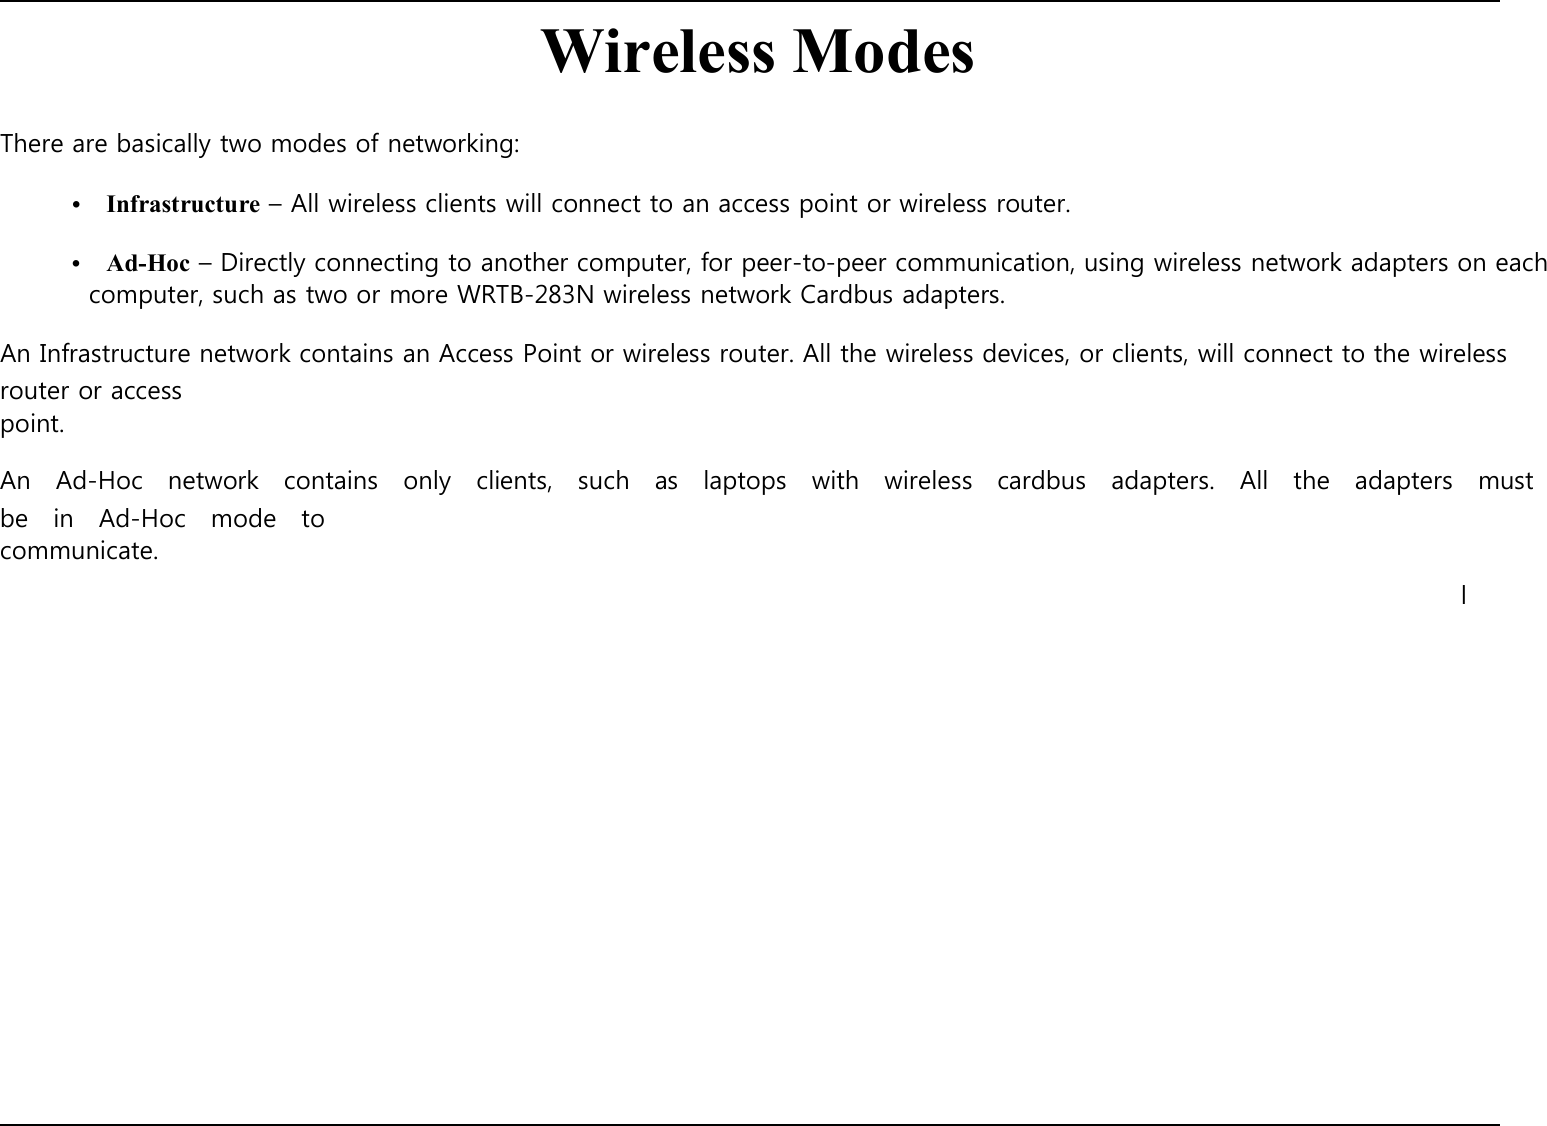        There are basically two modes of networking:   Wireless Modes  •    Infrastructure – All wireless clients will connect to an access point or wireless router.  •    Ad-Hoc – Directly connecting to another computer, for peer-to-peer communication, using wireless network adapters on each computer, such as two or more WRTB-283N wireless network Cardbus adapters.  An Infrastructure network contains an Access Point or wireless router. All the wireless devices, or clients, will connect to the wireless router or access point.  An    Ad-Hoc    network    contains    only    clients,    such    as    laptops    with    wireless    cardbus    adapters.    All    the    adapters    must   be    in    Ad-Hoc    mode    to communicate.                             l 